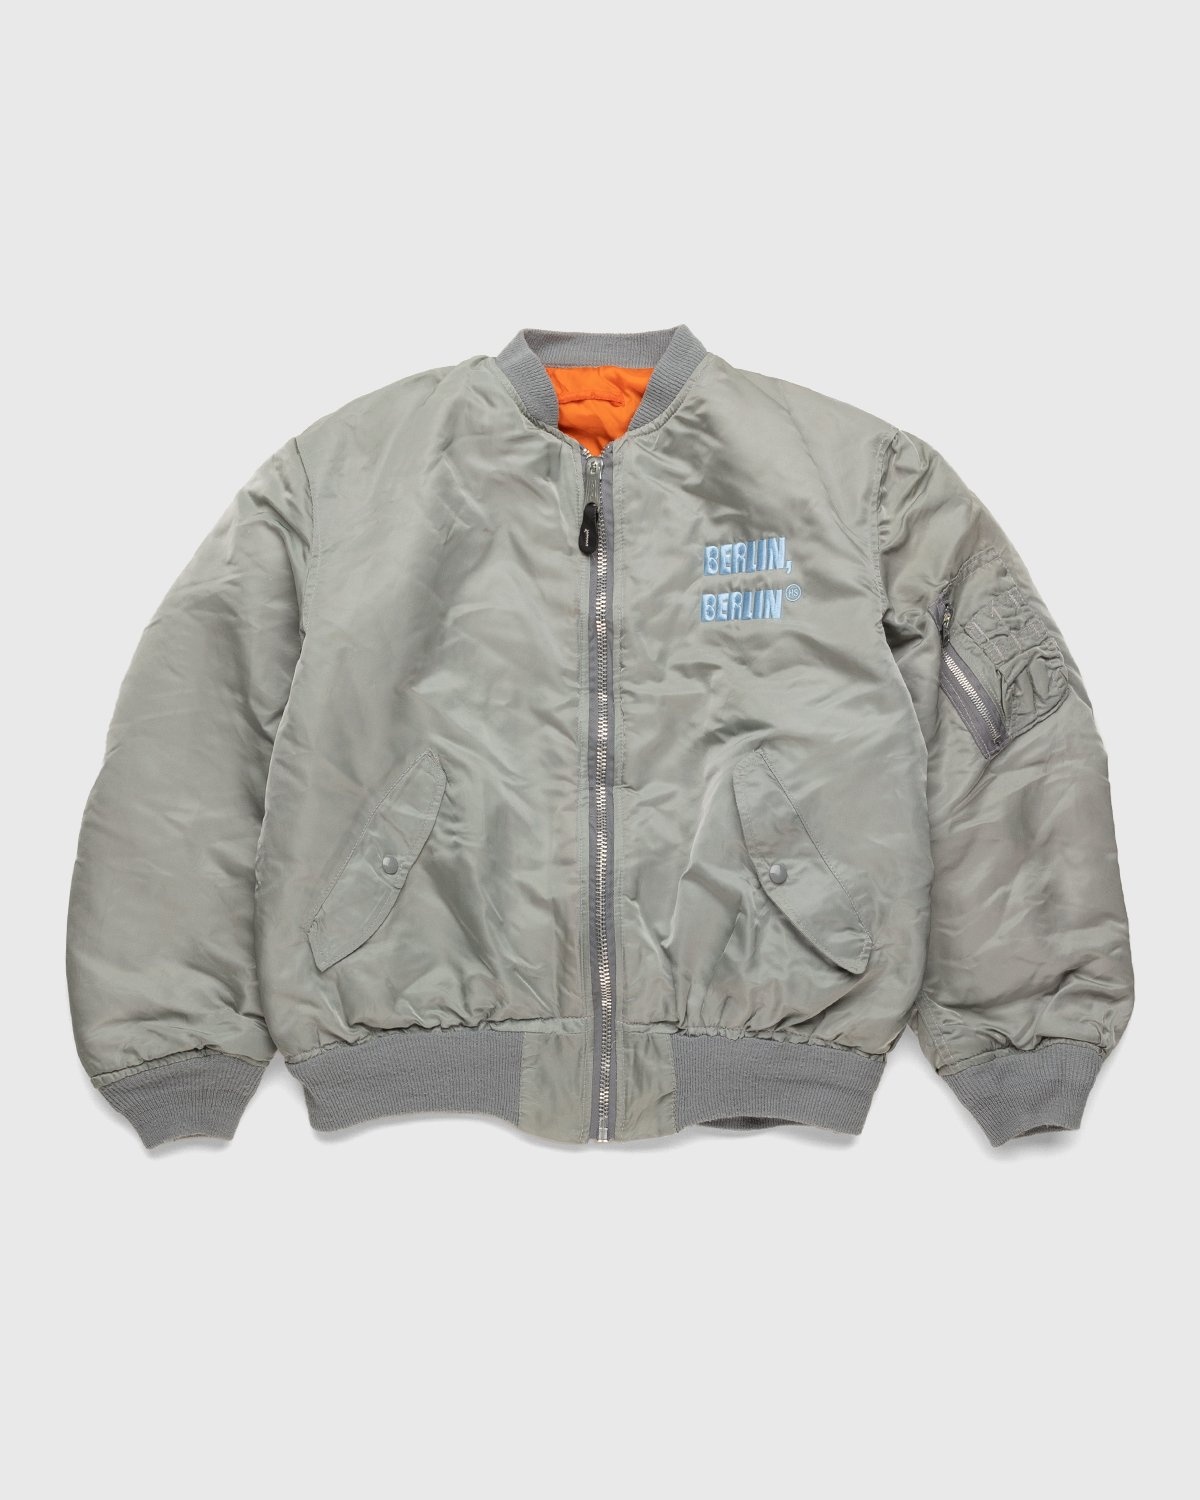 Highsnobiety – Berlin Berlin Embroidered Vintage MA-1 Grey - Outerwear - Grey - Image 2